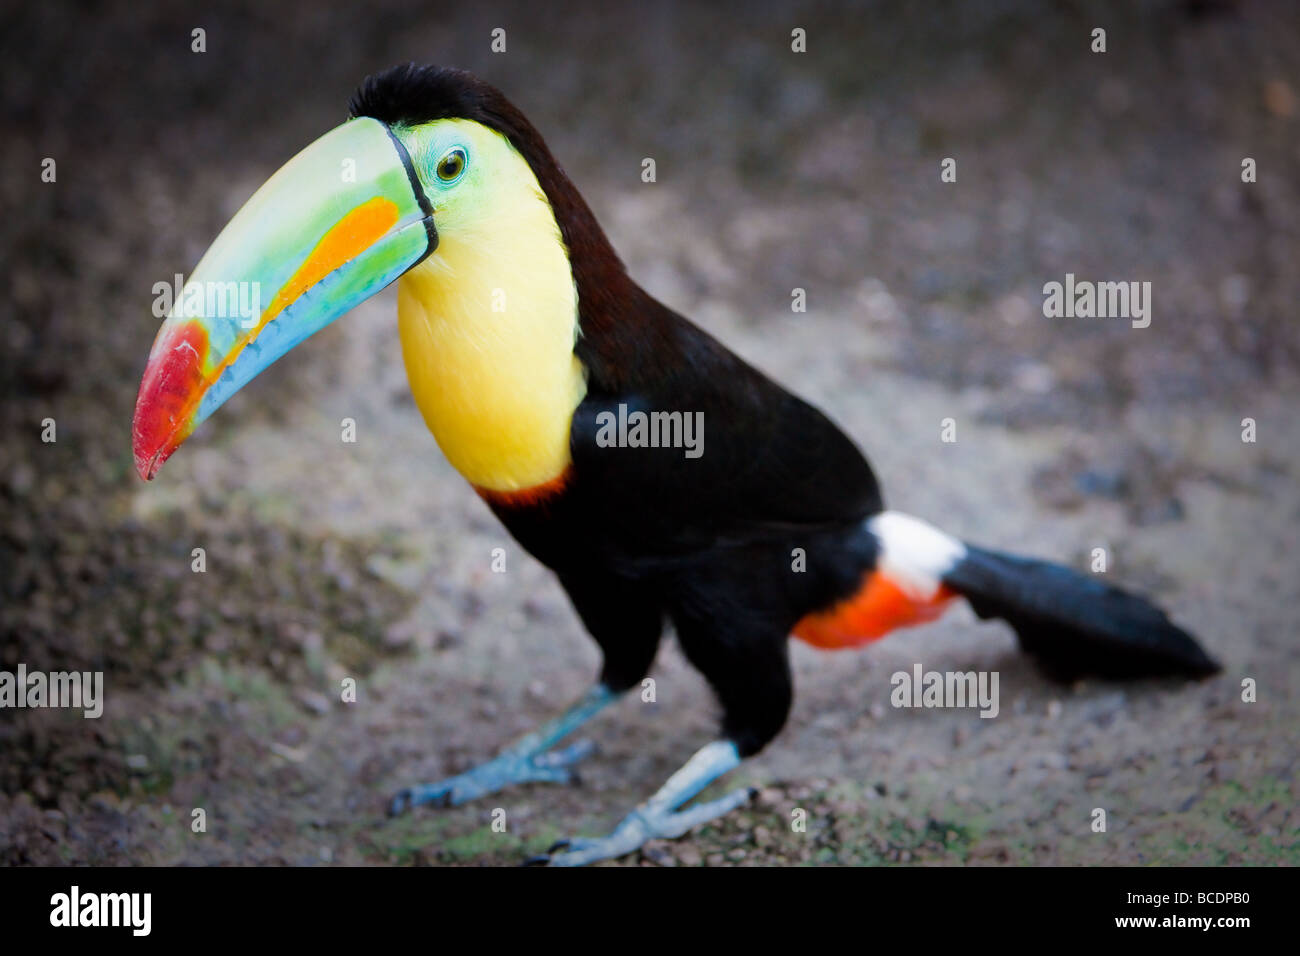 toucan (lat. Ramphastos sulfuratus) standing on the ground focus is on the eye Stock Photo